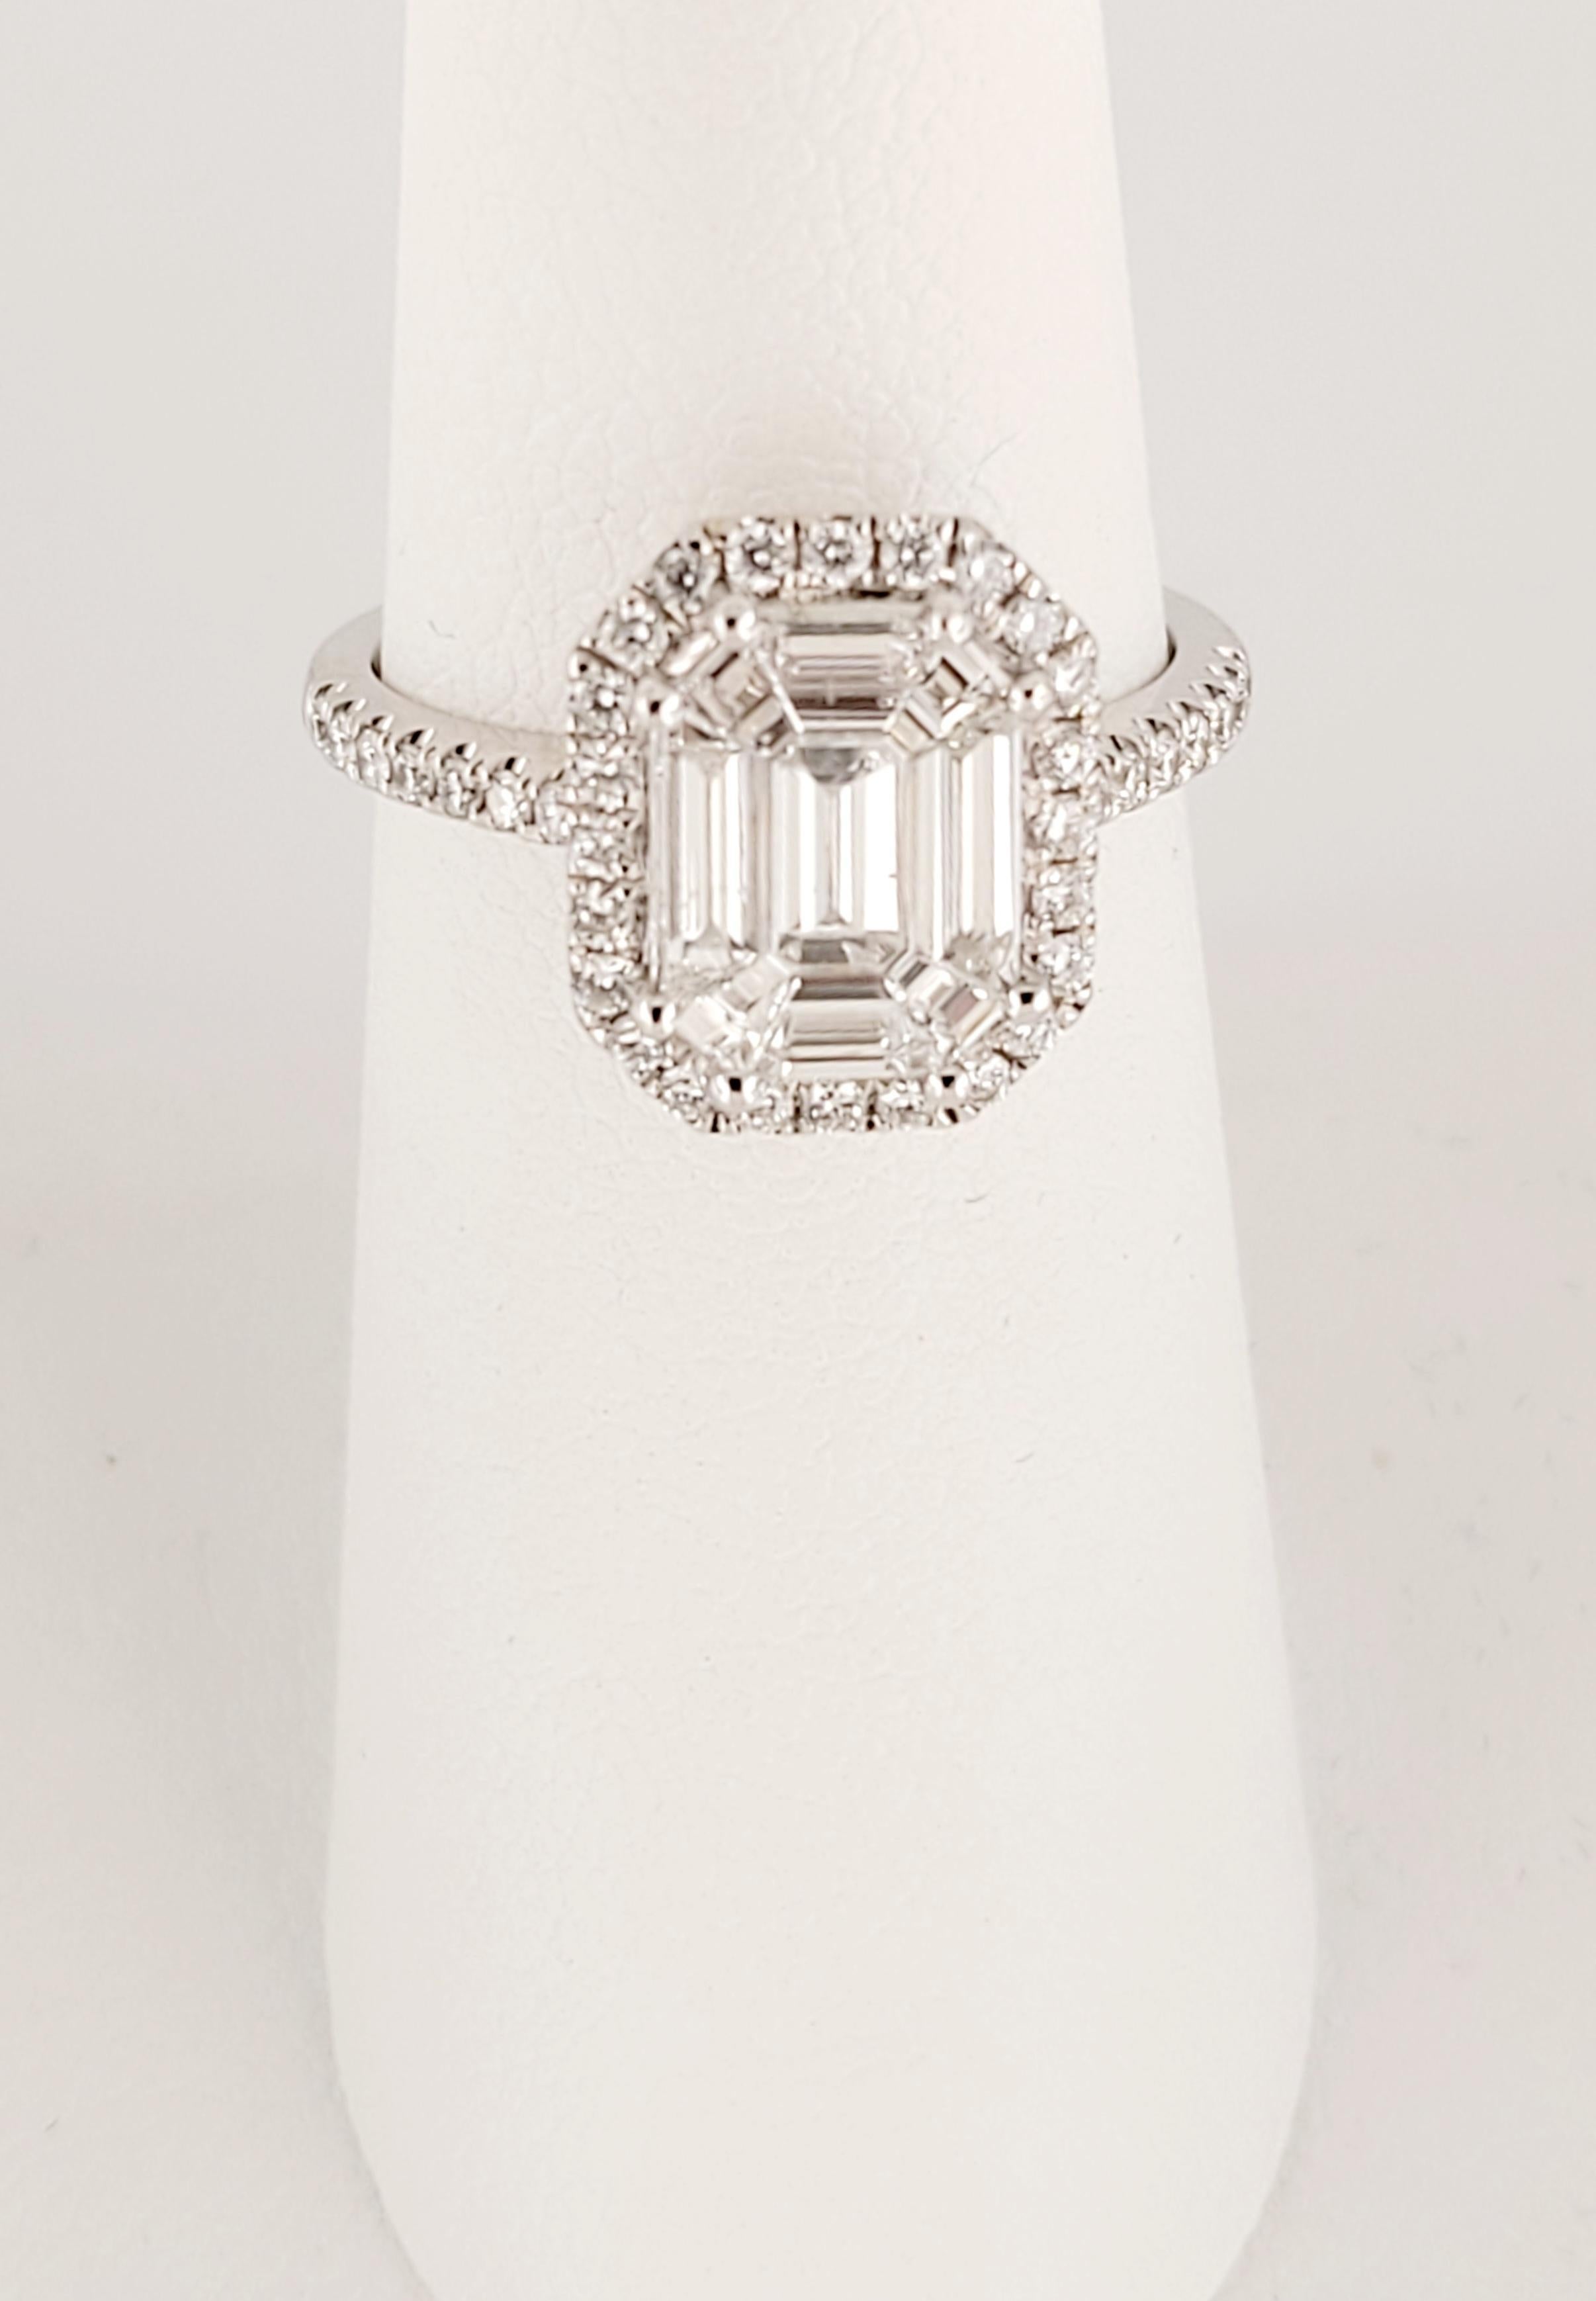 Pie Cut Center Stone Diamond, made out of 9 stones. Natural Diamond E-F color, VVS clarity. Side stones approximately 0.60 carats in total, same color and clarity. Set in 18K White Gold. Size 6. Retail price $4900.